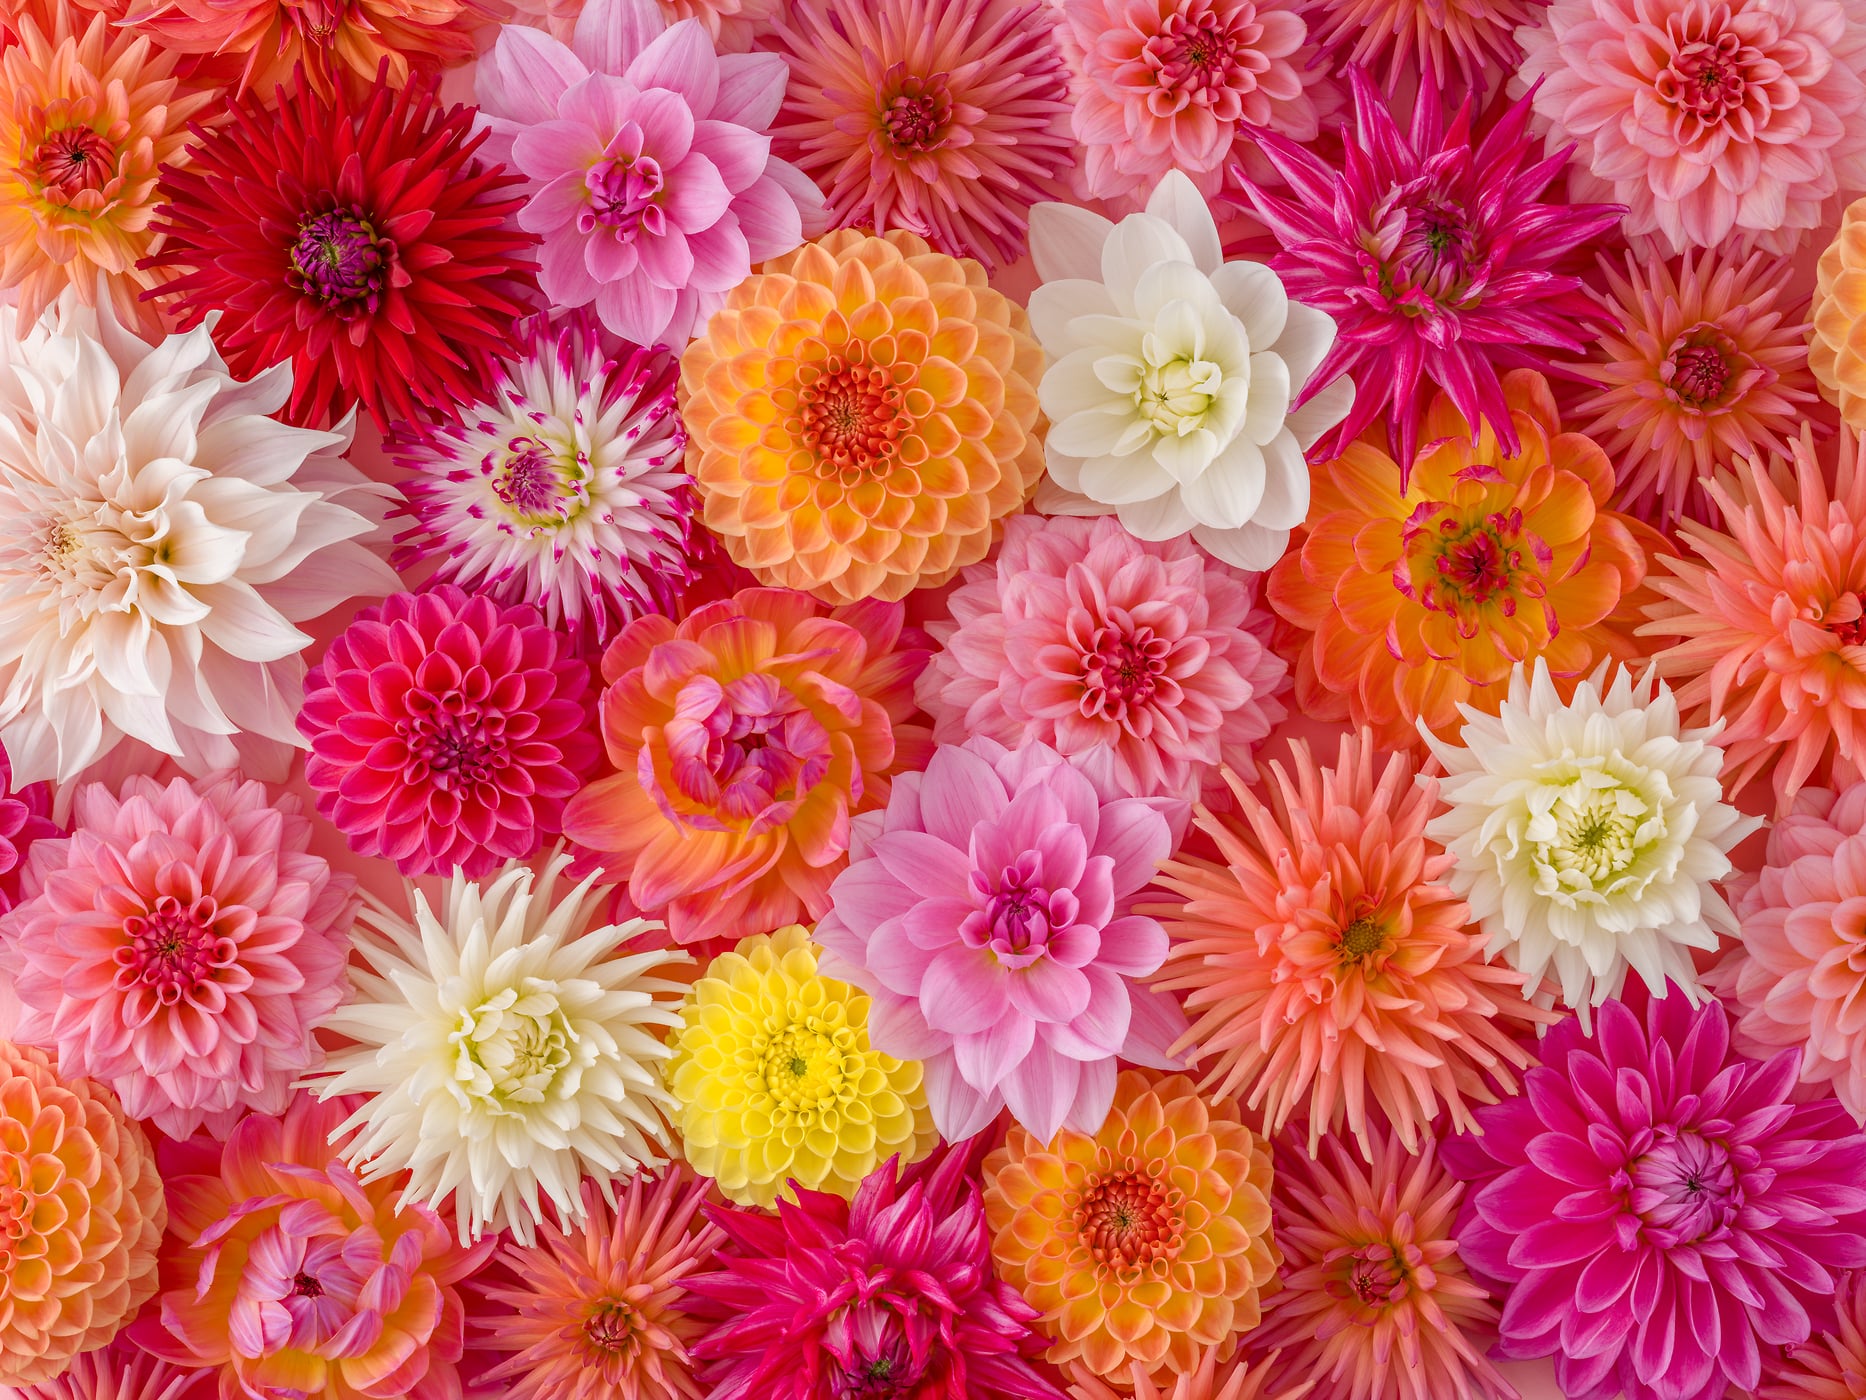 407 megapixels! A very high resolution, wall mural photo of flowers; photograph created by Assaf Frank.